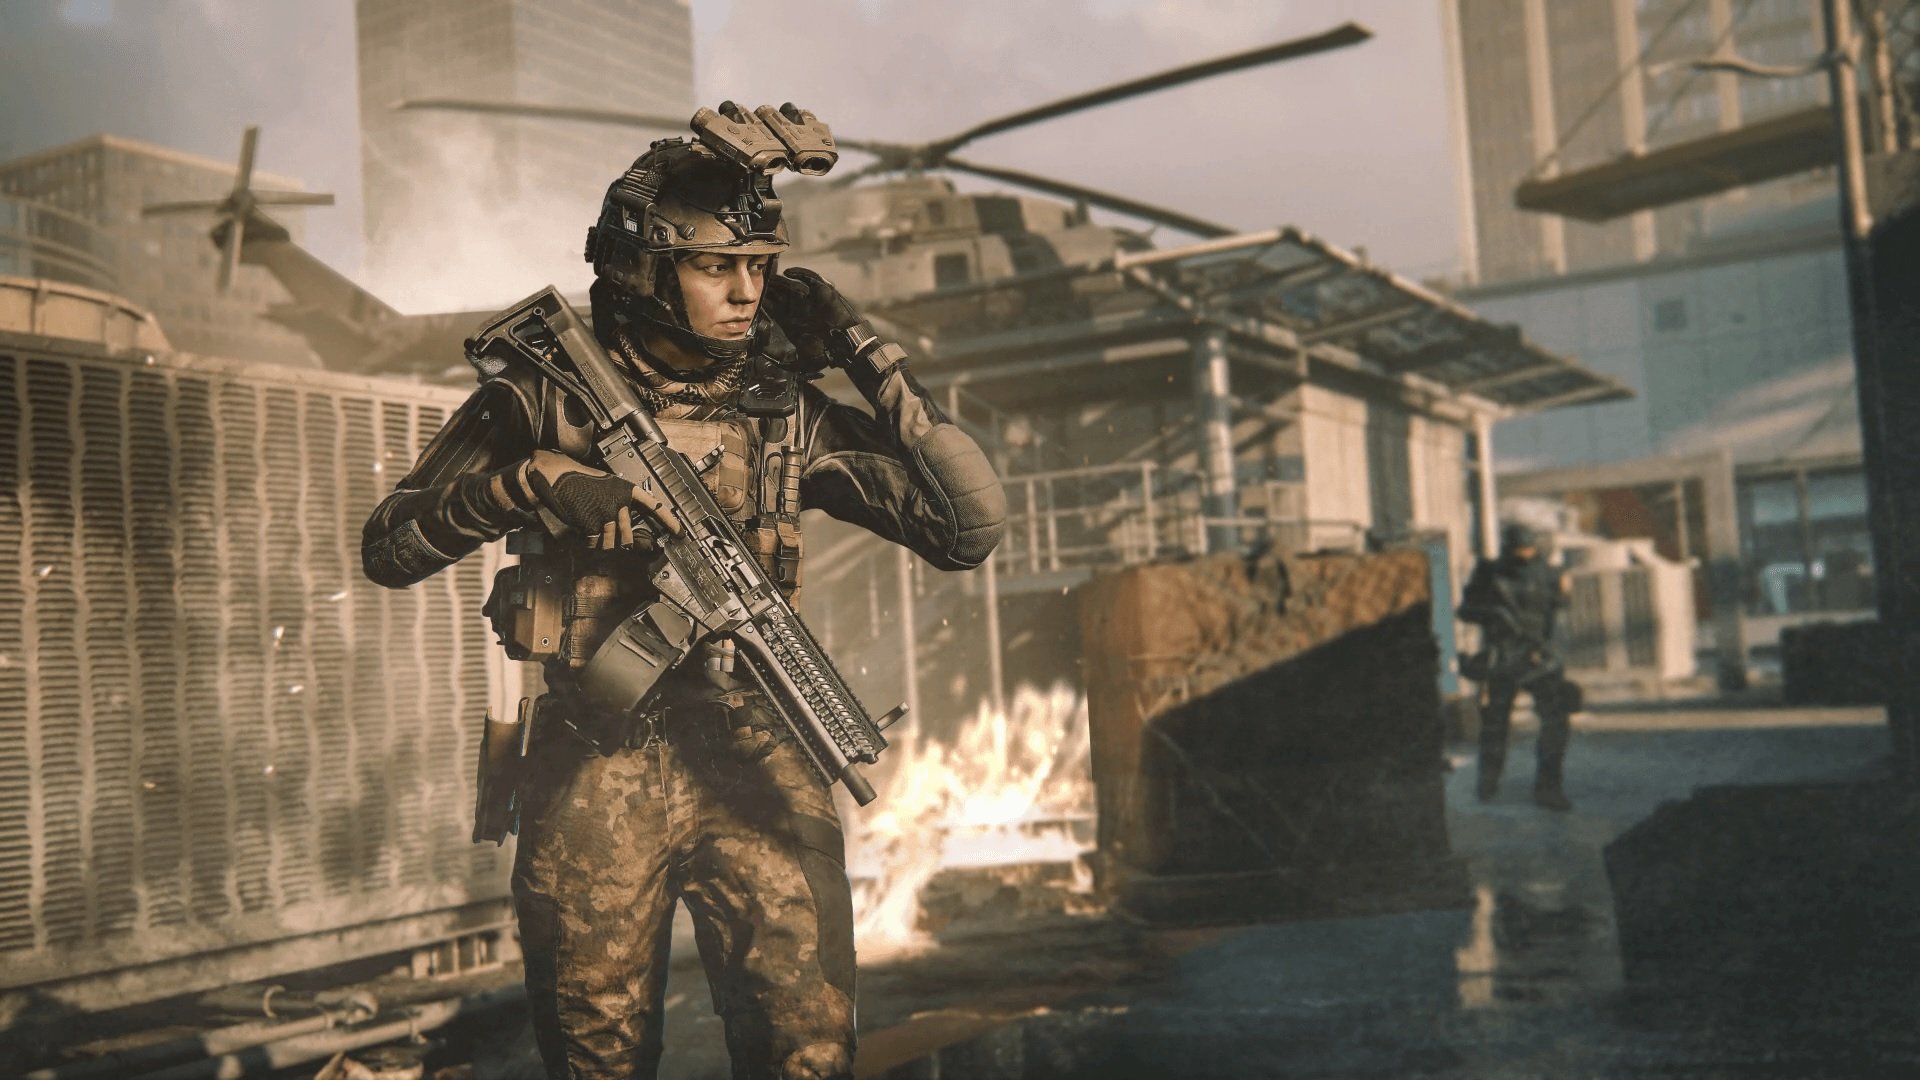 Call Of Duty: Modern Warfare 3 release date and multiplayer launch time